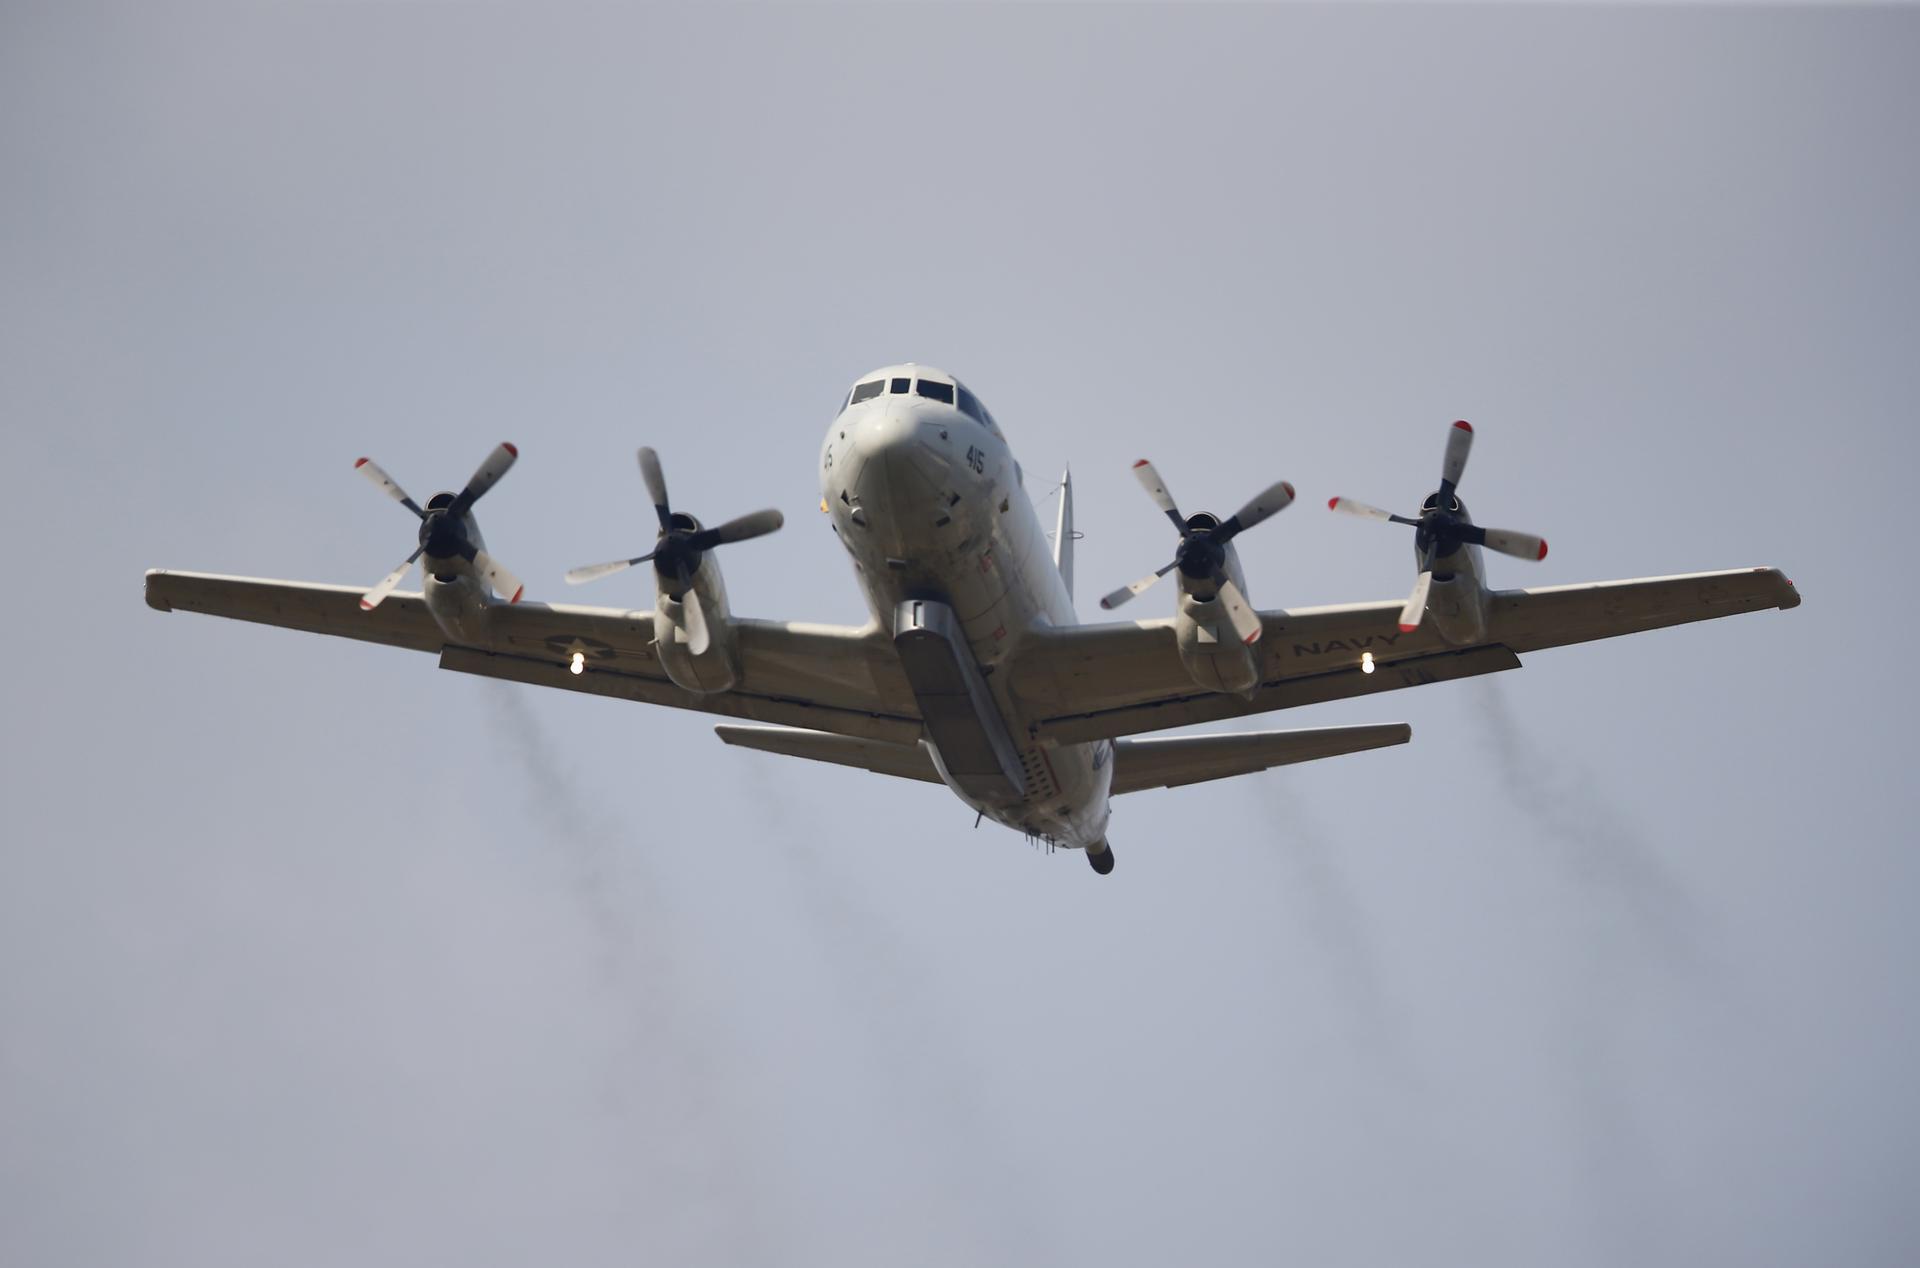 A U.S. Navy P-3 Orion Maritime patrol aircraft takes off from Incirlik airbase in the southern city of Adana, Turkey, July 26, 2015. Long a member of the U.S.-led coalition against ISIS, Turkey made a dramatic turnaround this week by granting the alliance